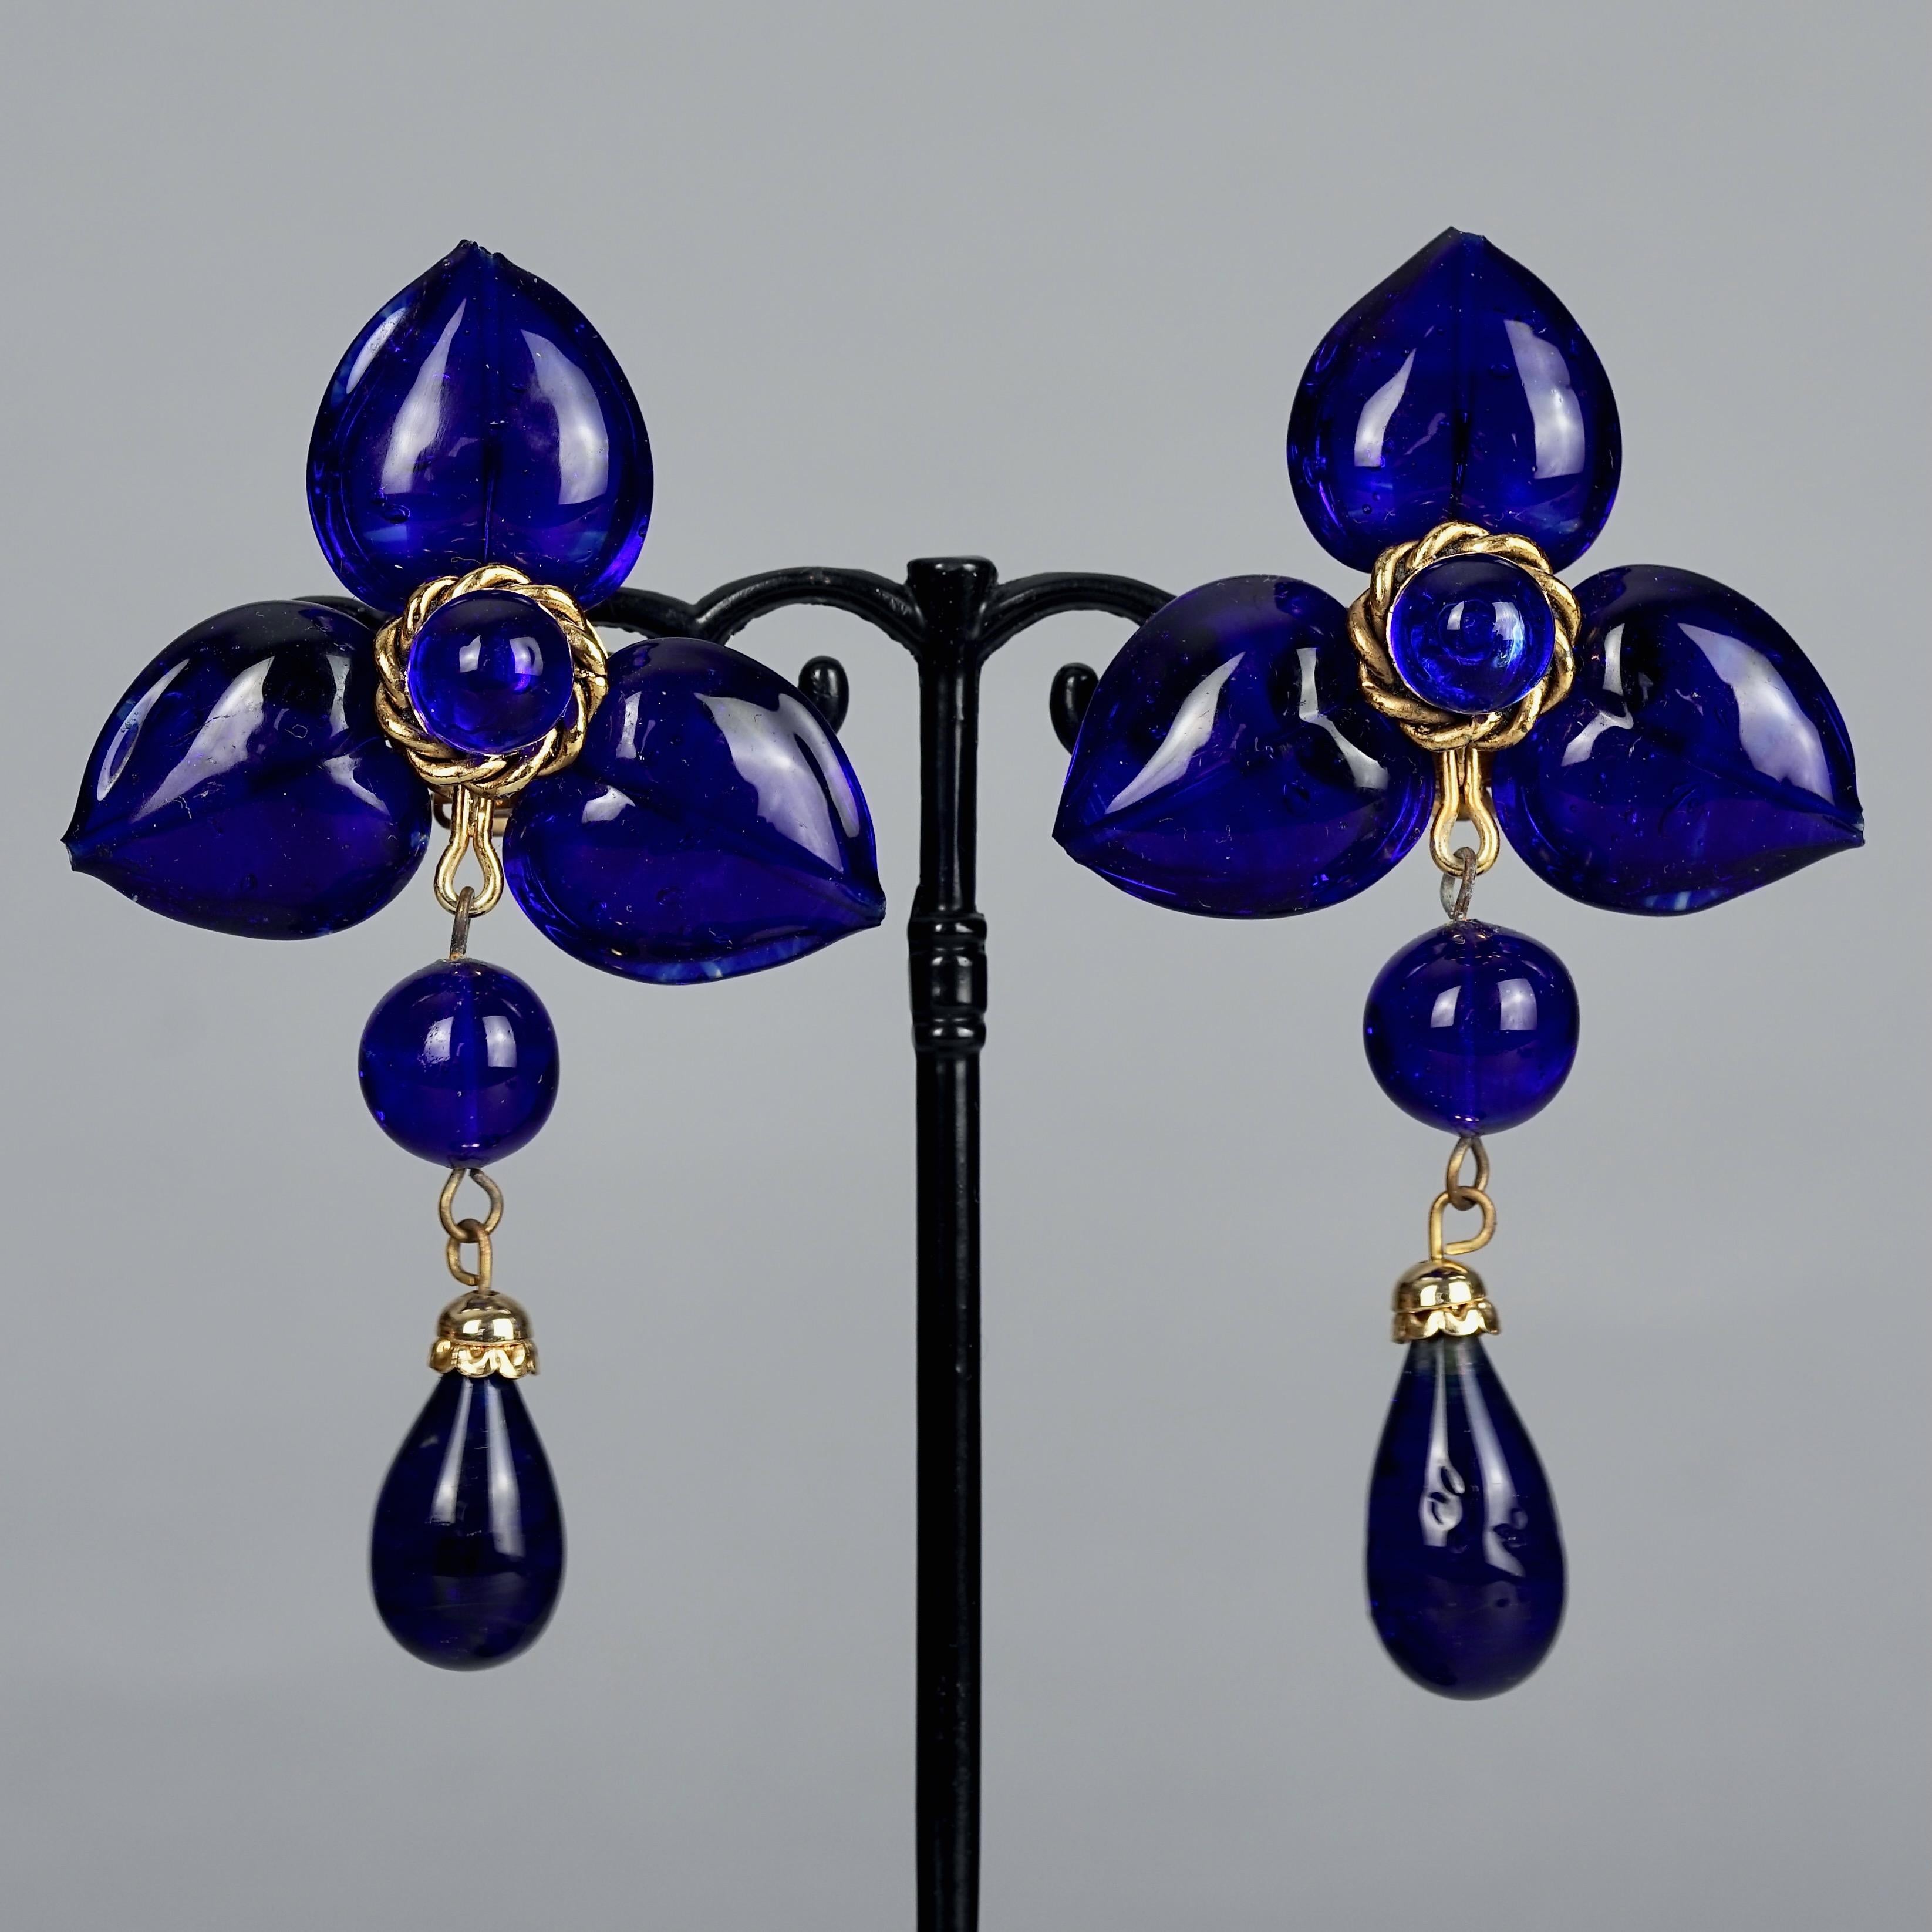 Vintage MOSCHINO Blue Glass Heart Dangling Earrings In Excellent Condition For Sale In Kingersheim, Alsace